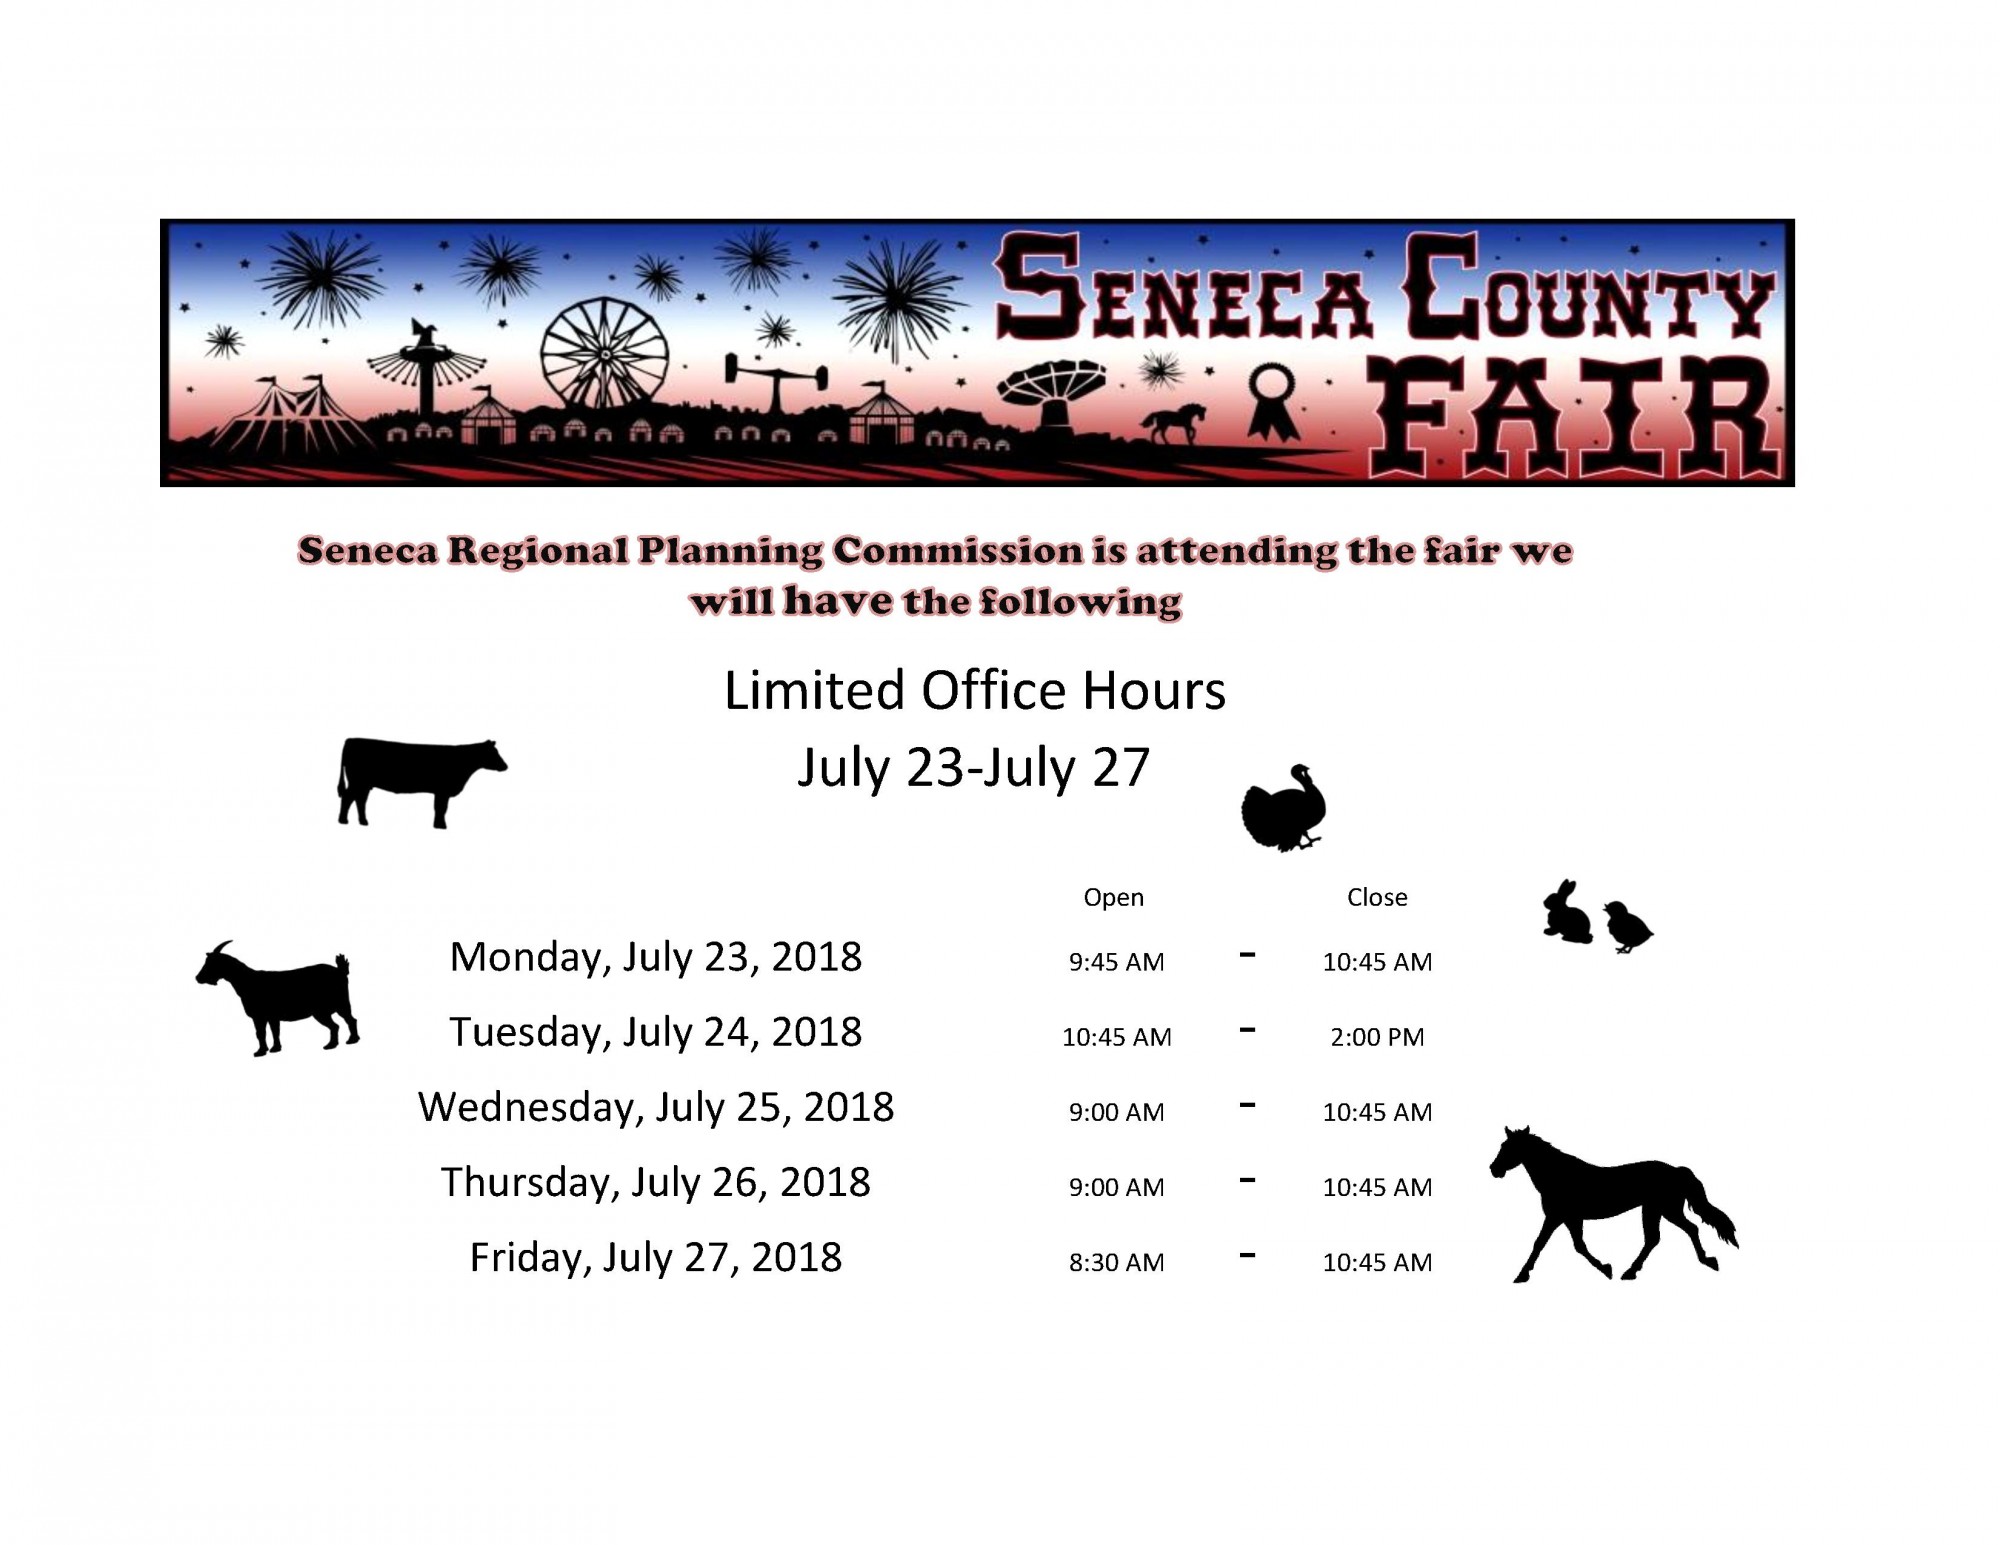 Limited Office Hours during the Seneca County Fair Seneca RPC